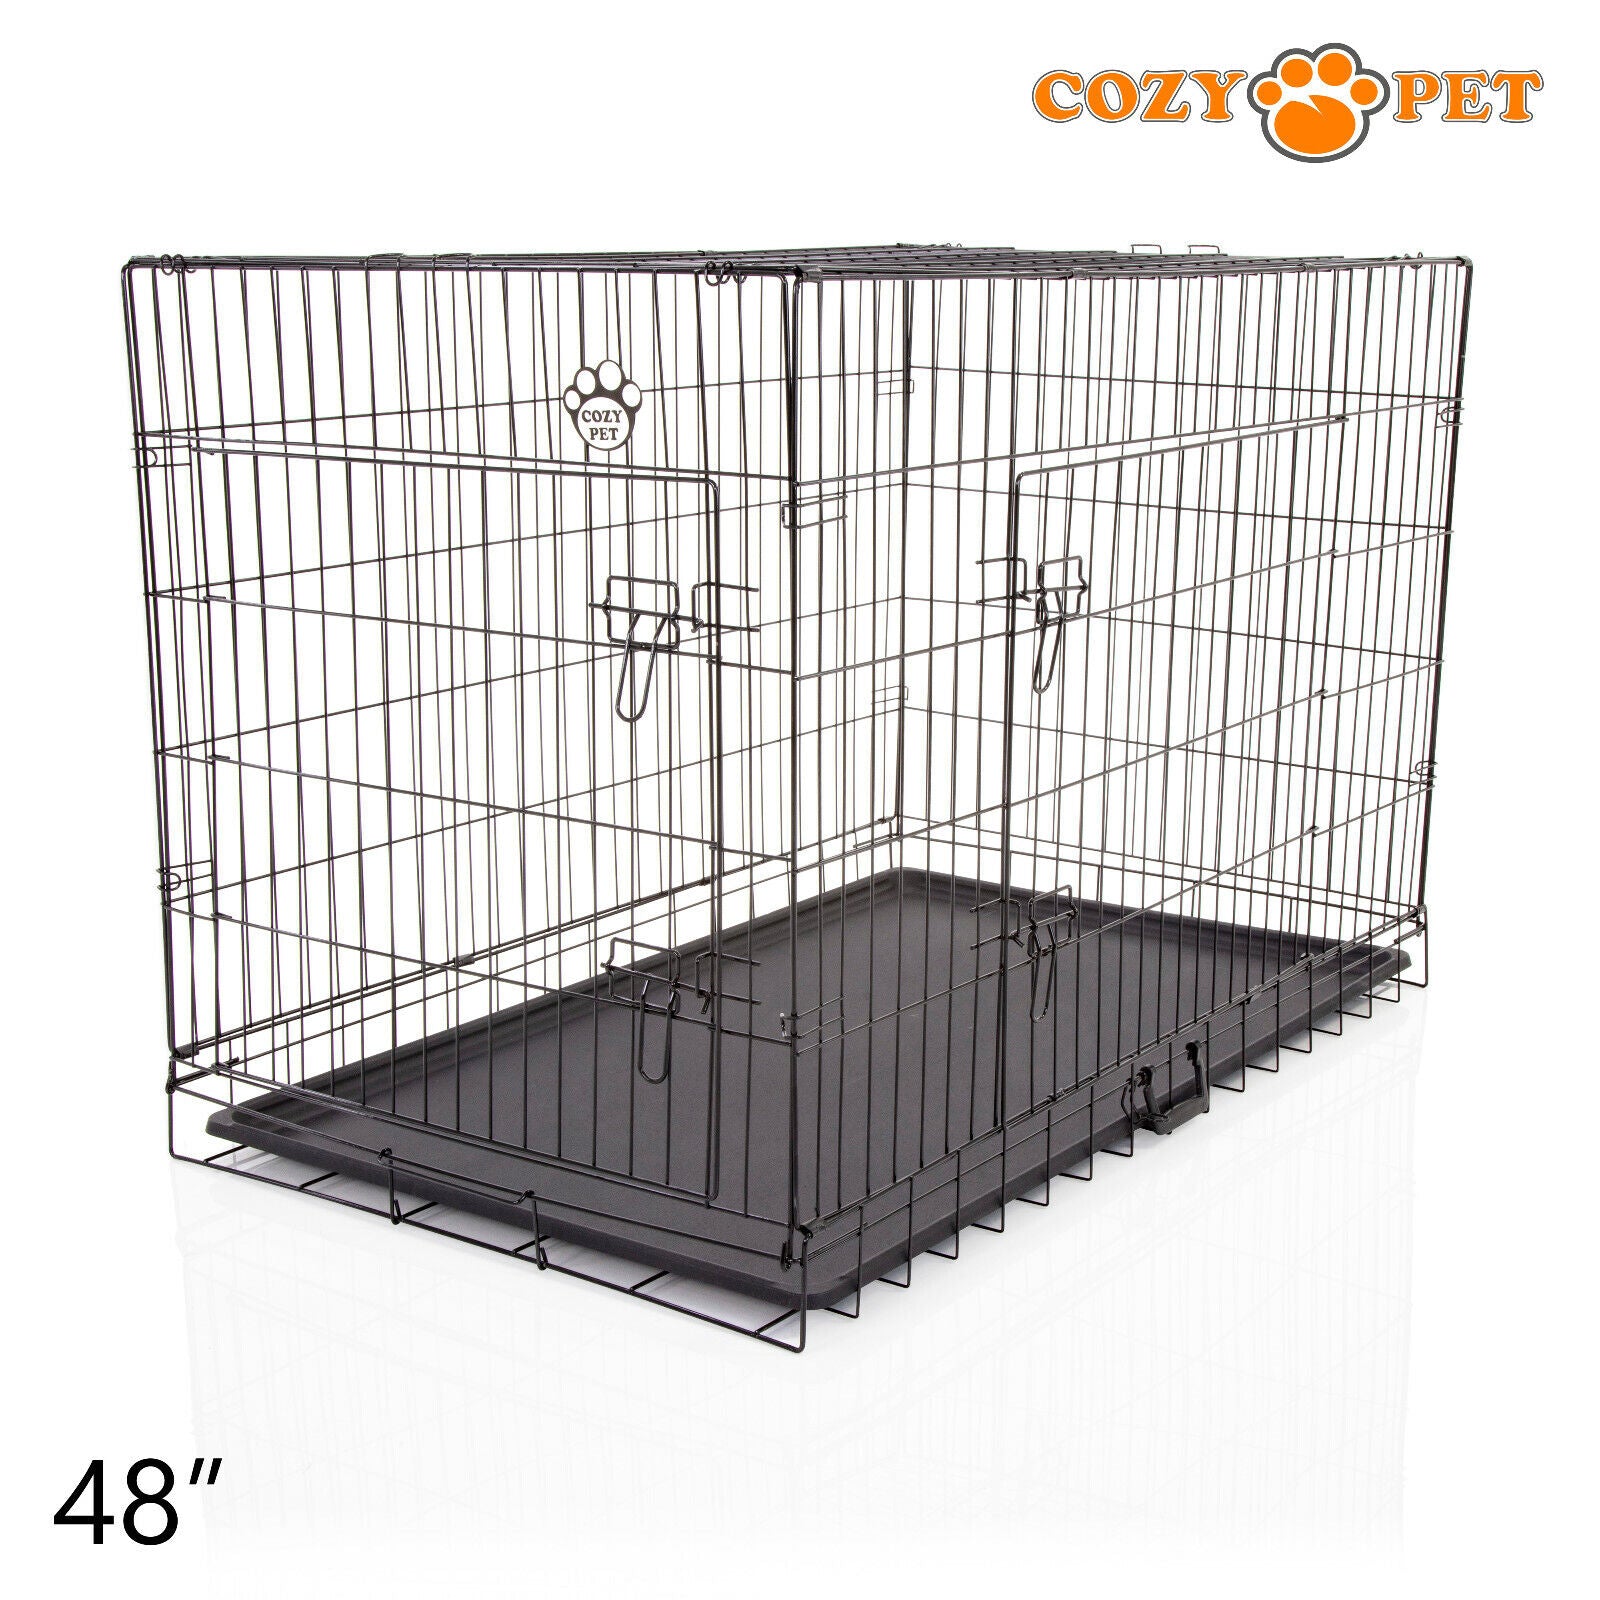 Dog Cage 48 Inch Puppy Crate XXL Cozy Pet Black Dog Crates Folding Metal Cages